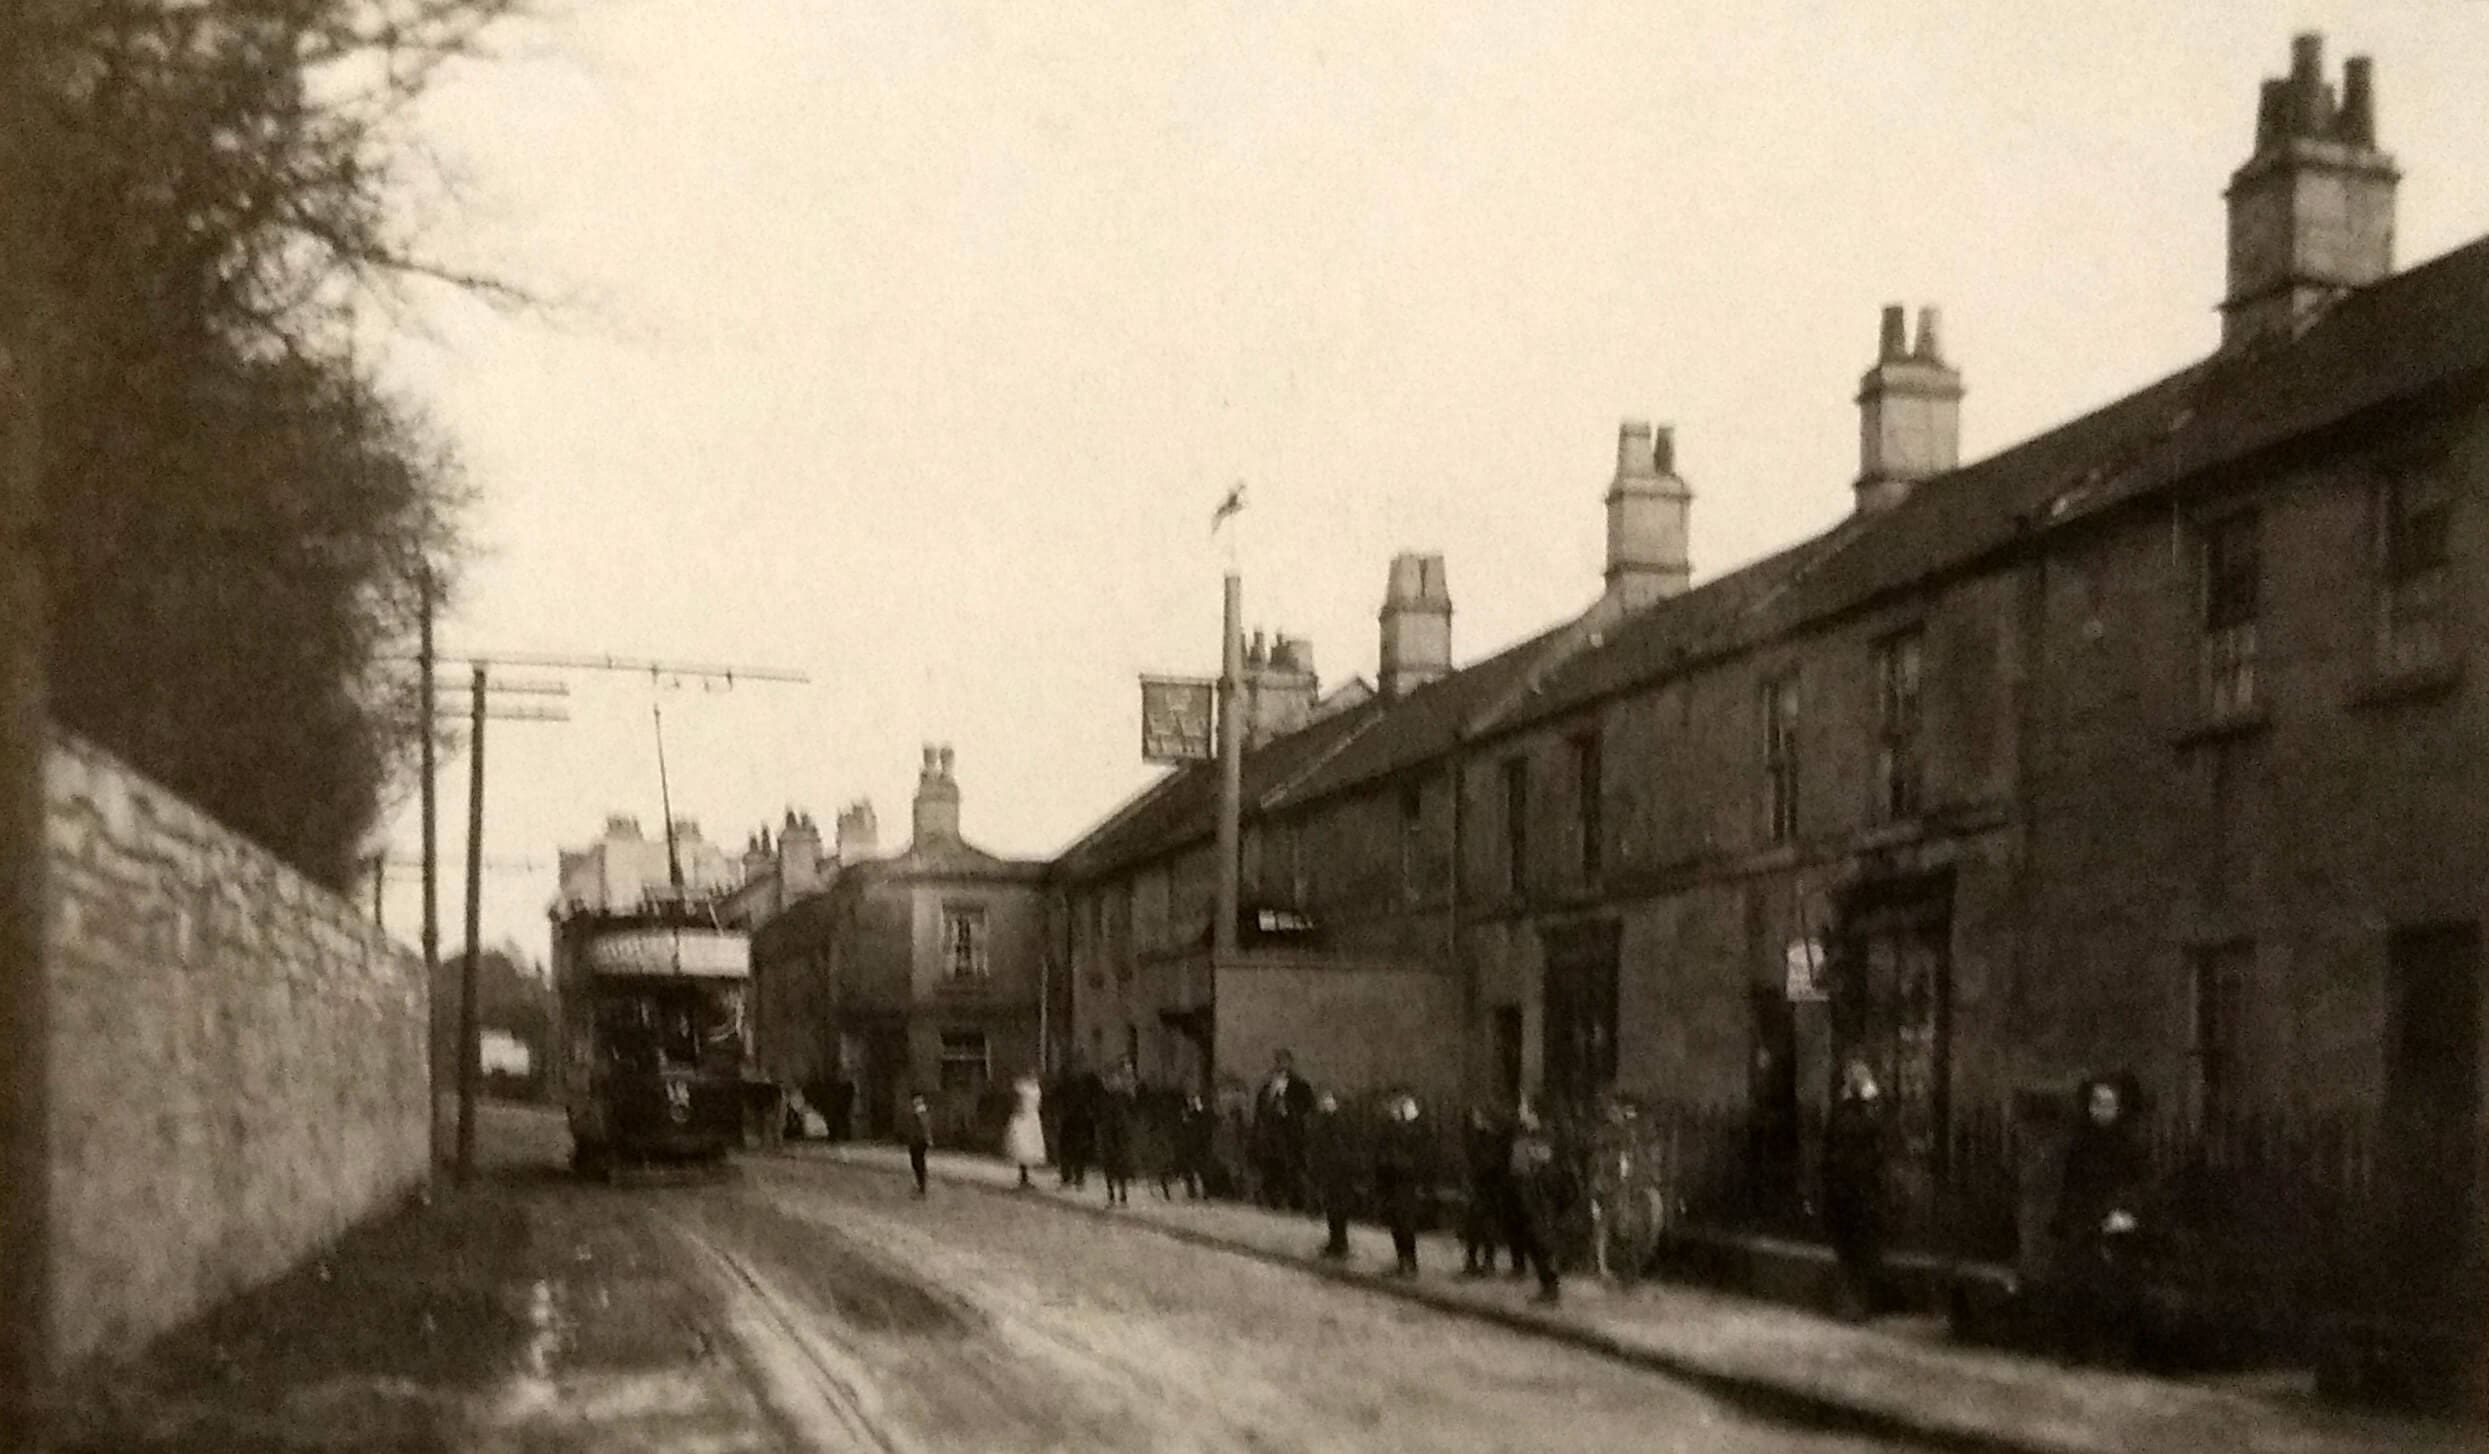 Tram on North Road, Combe Down about 1905